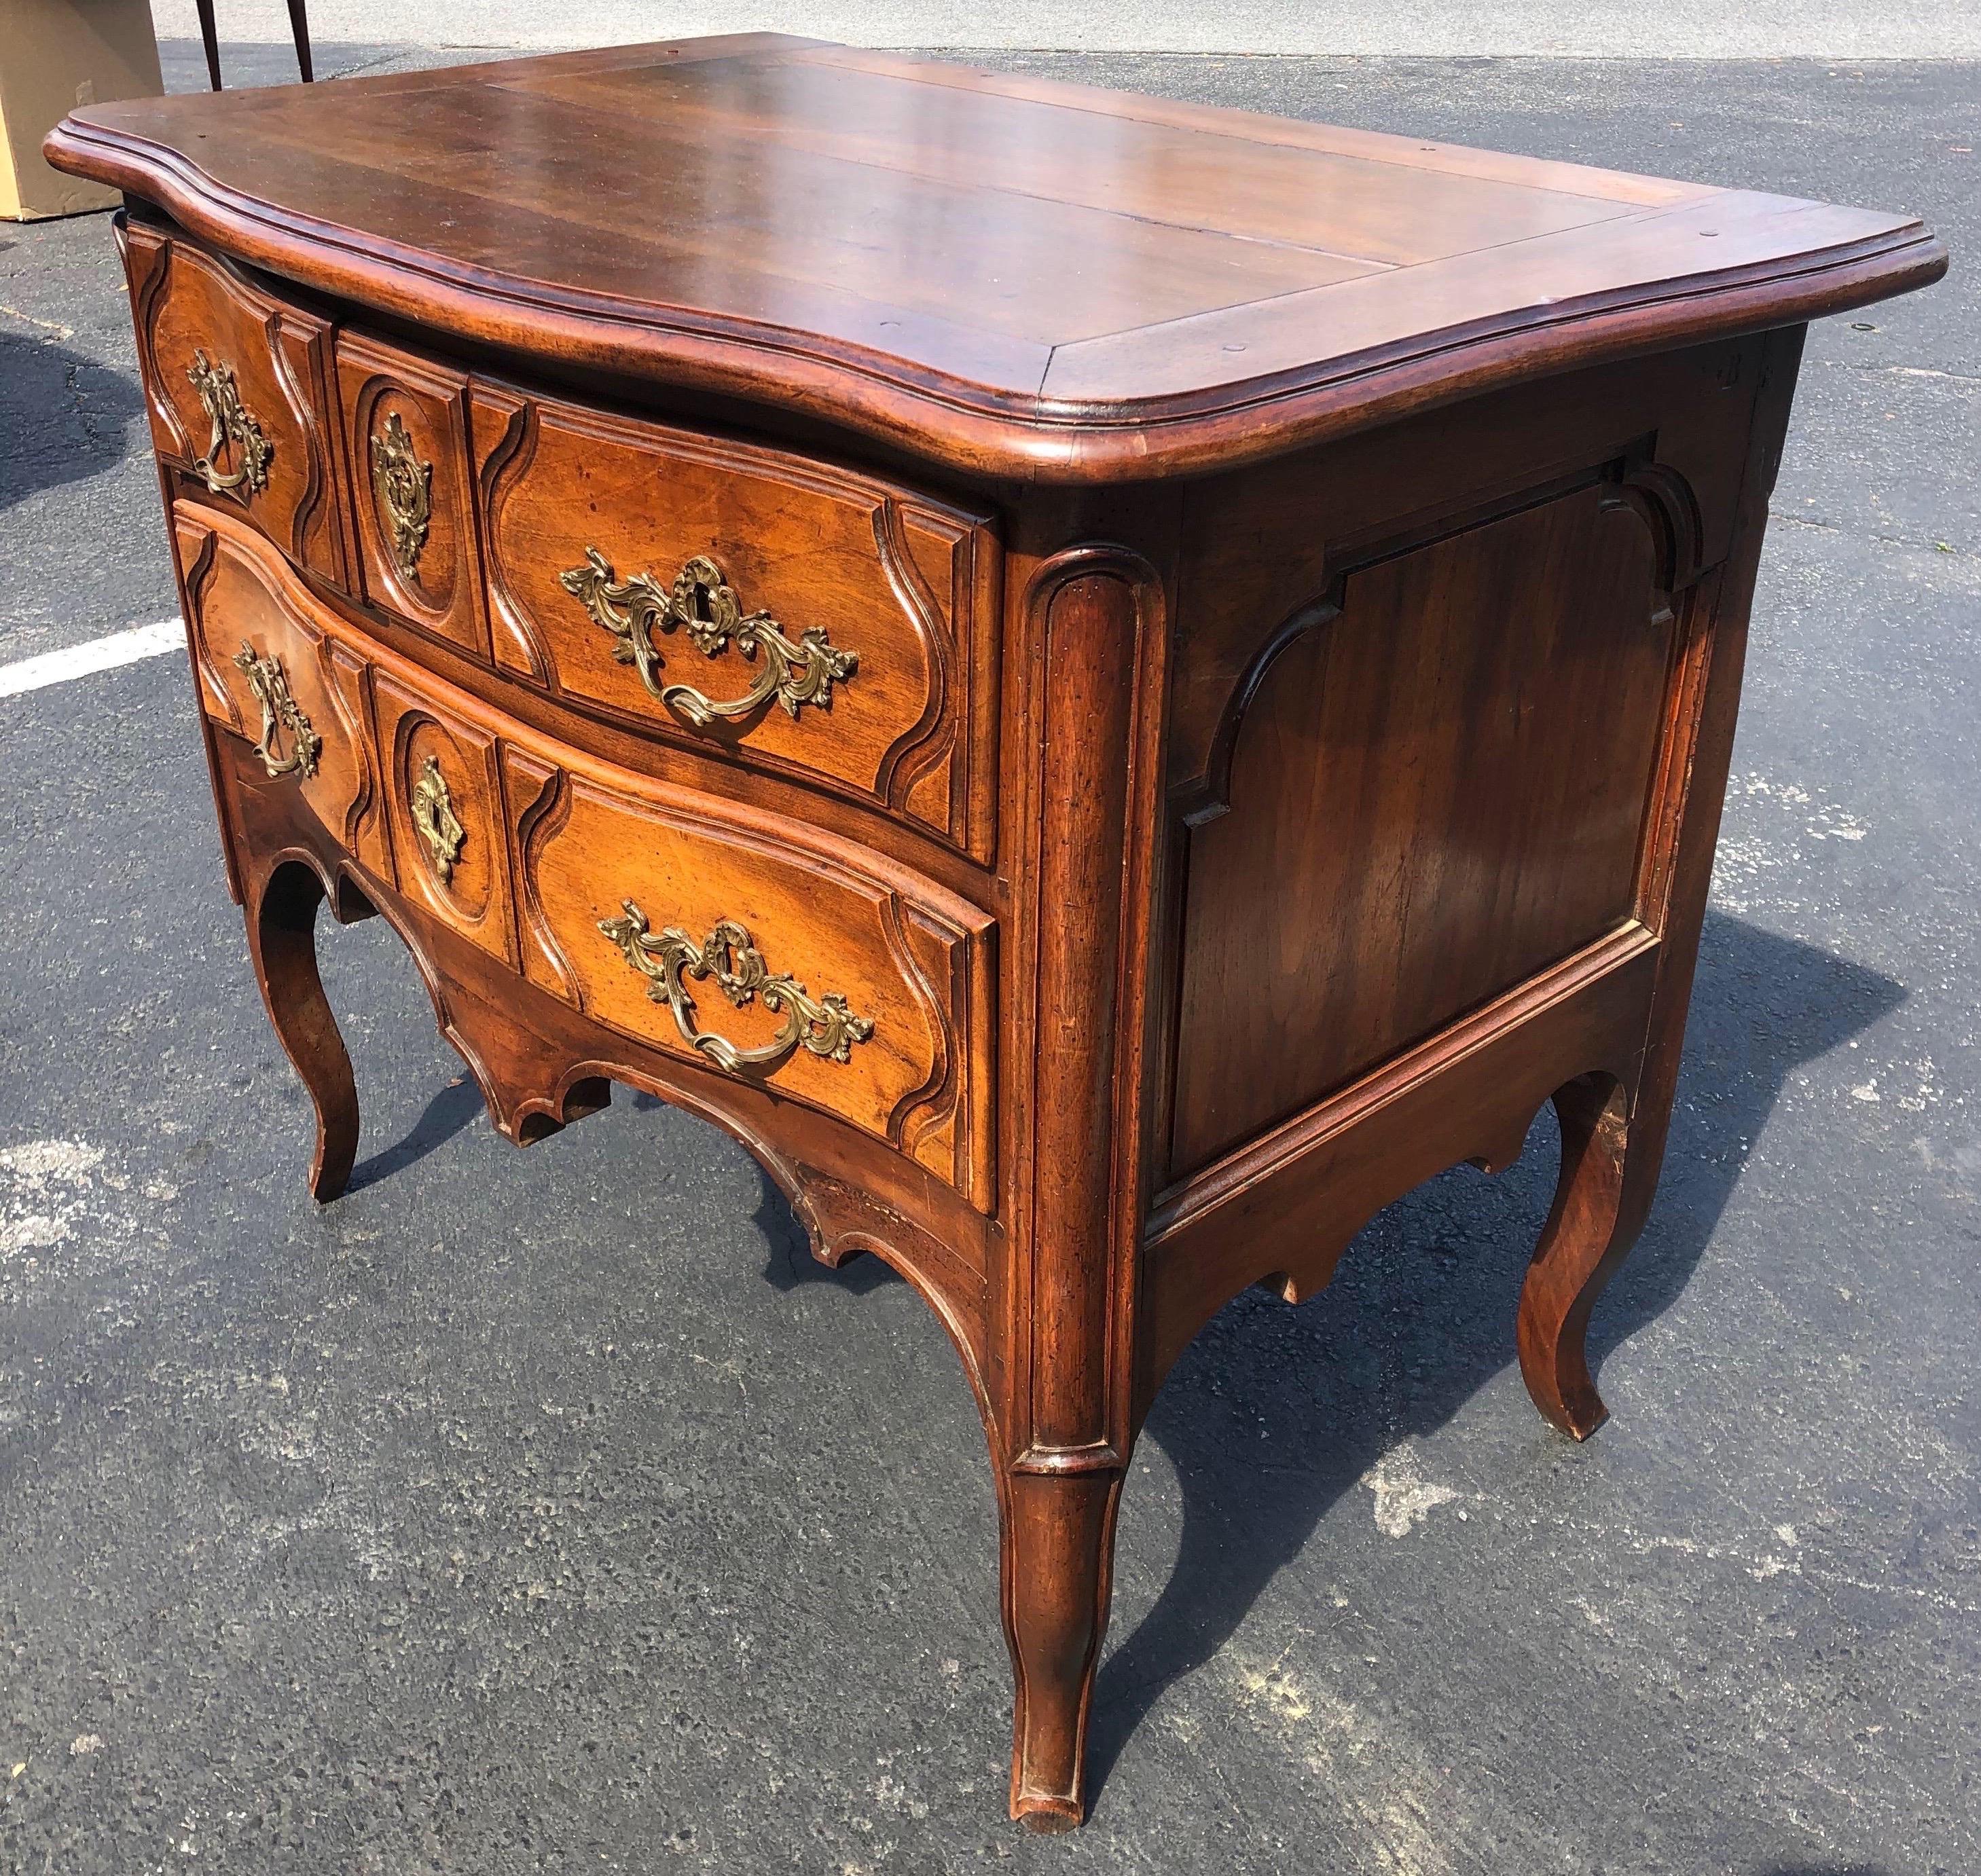 19th century French Provencial walnut 4-drawer commode. Three smaller drawers over one full drawer. Wonderful patina and the dimensions.